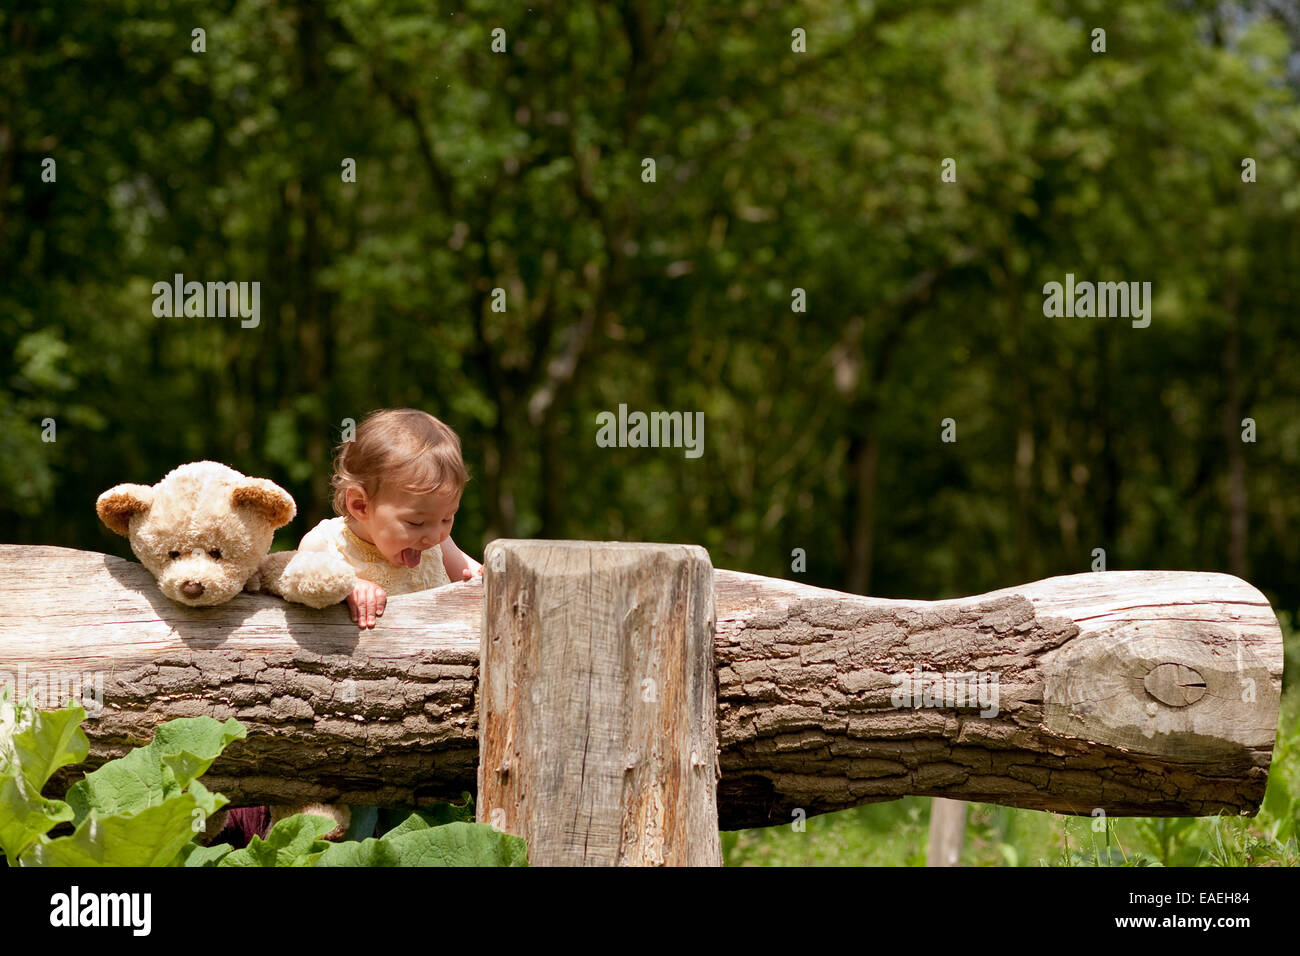 toddler 13 months old (mixed race Caucasian/Oriental Asian girl) exploring the outdoors  supported by teddy bear Stock Photo